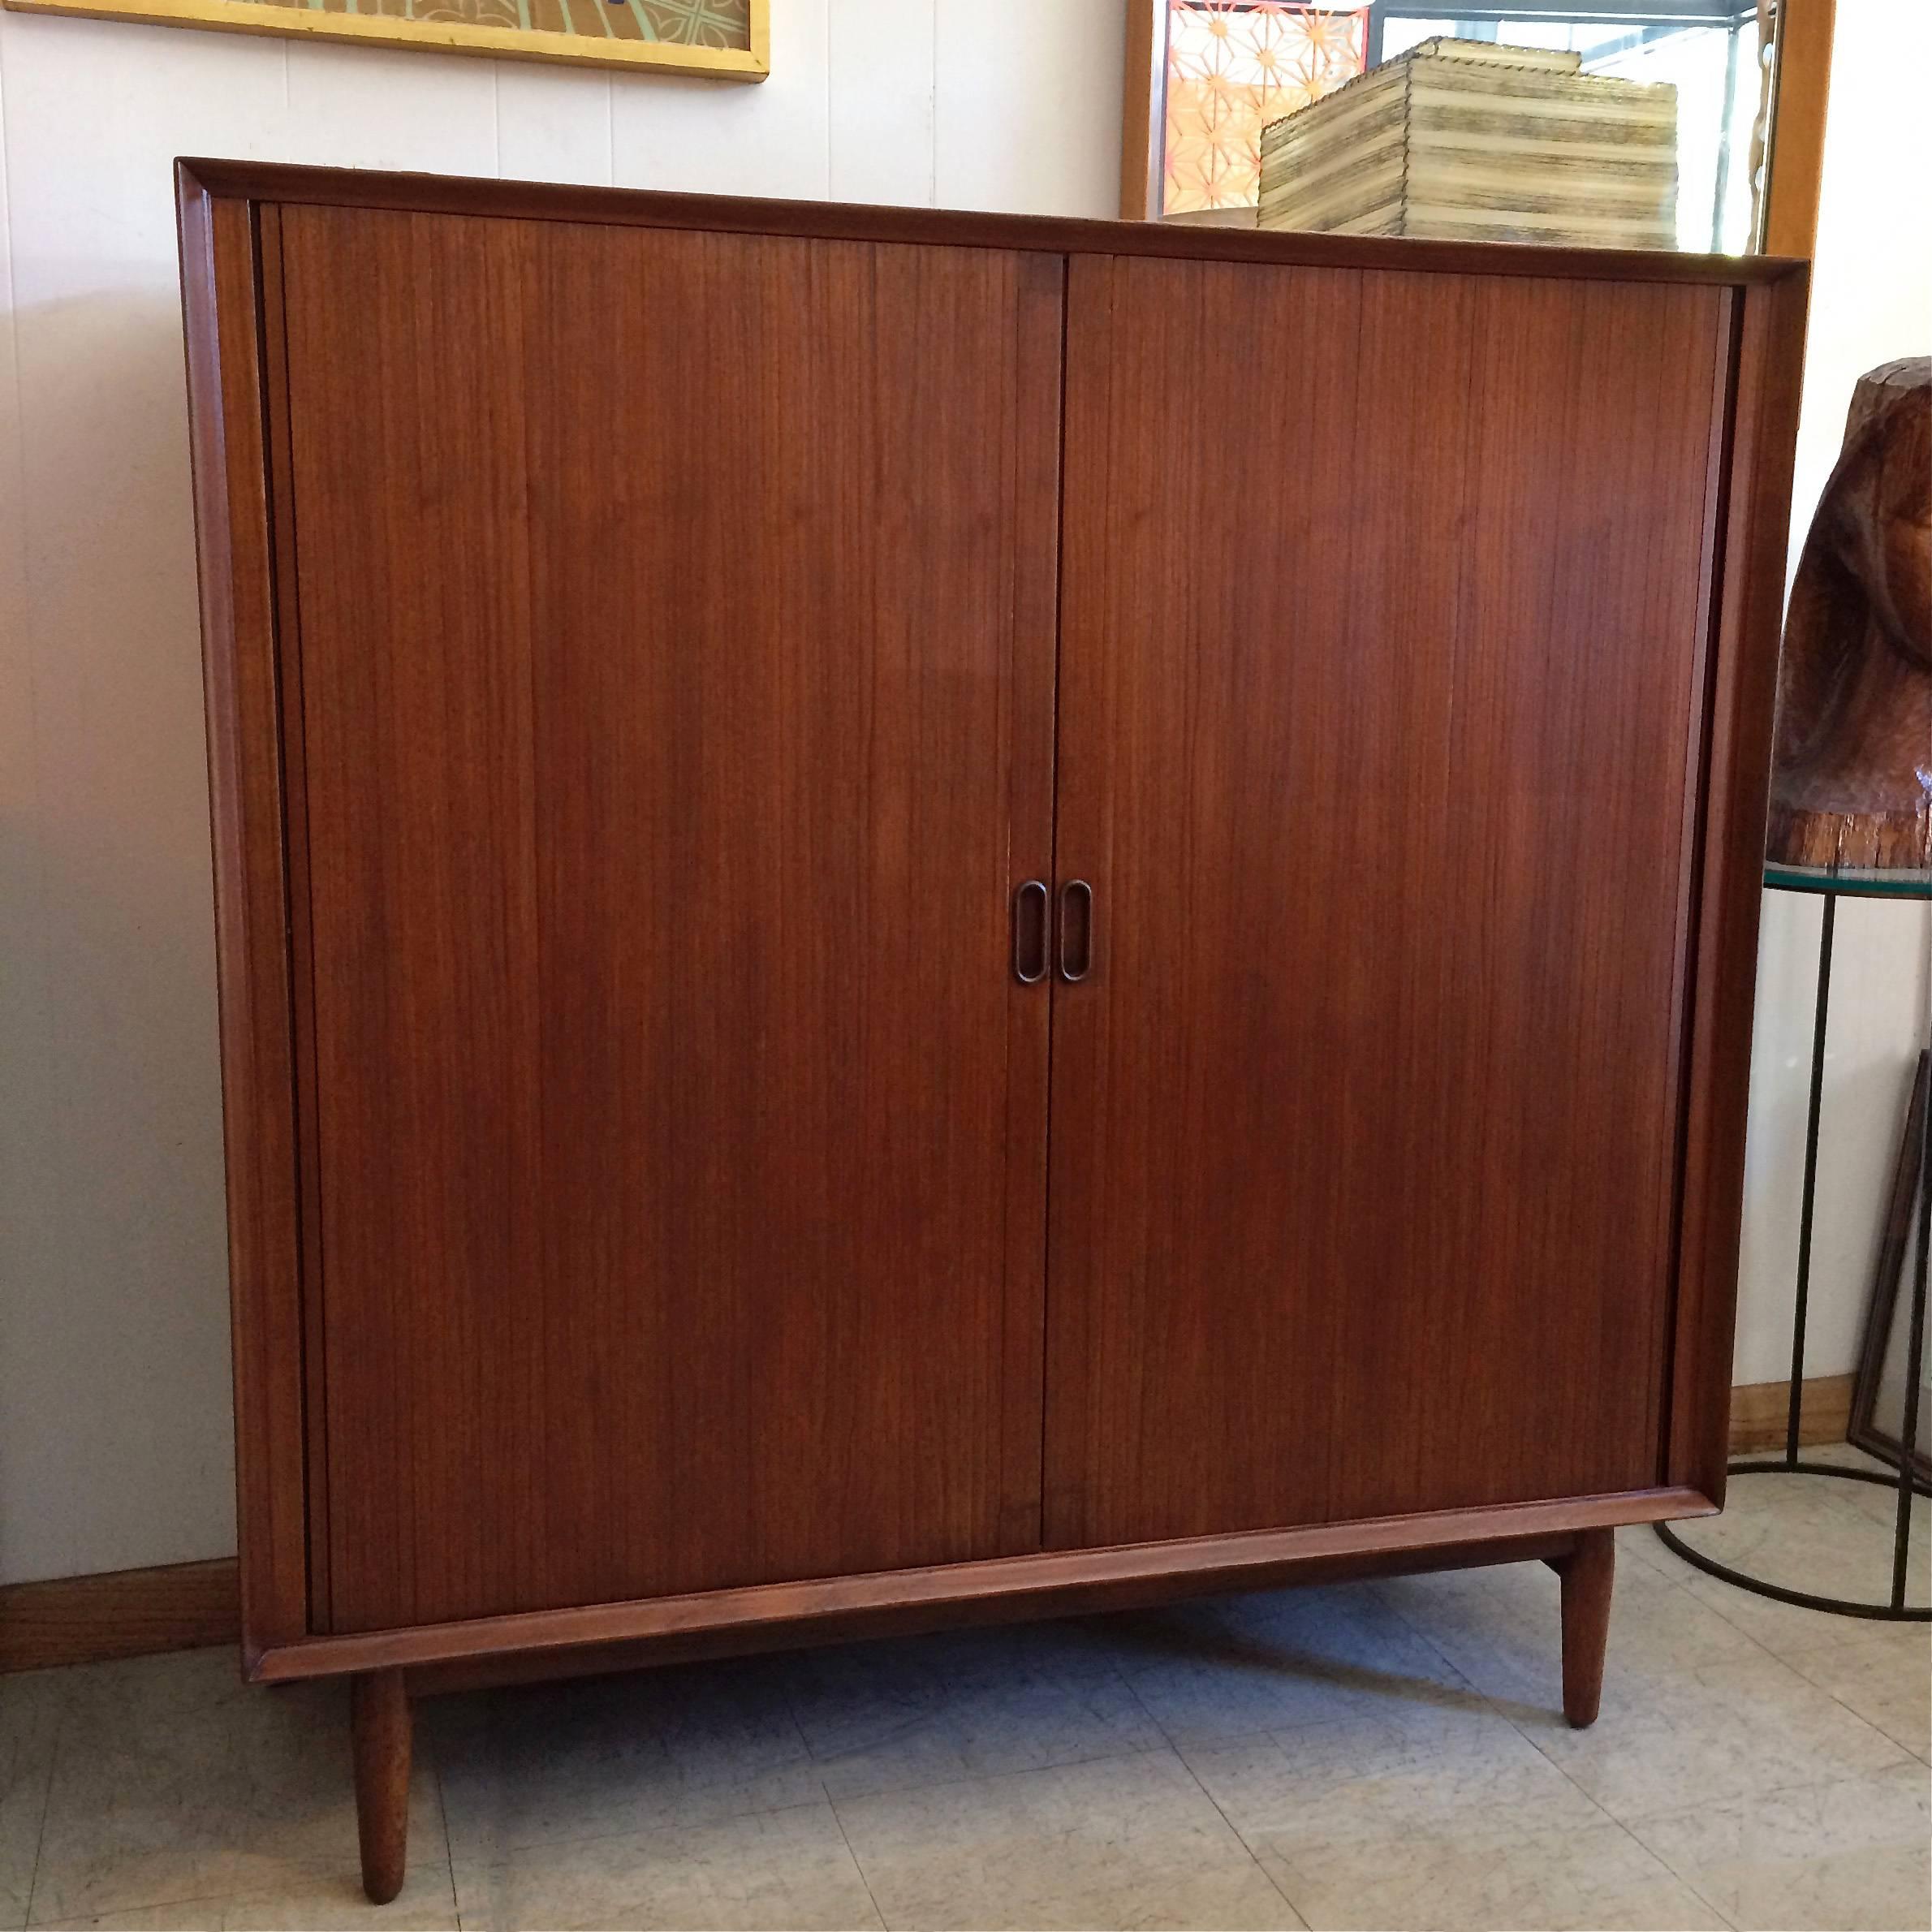 Danish modern, teak, gentlemen’s chest, highboy dresser by Arne Vodder for Sibast Mobler with tambour front doors and pull out shelves and drawers.